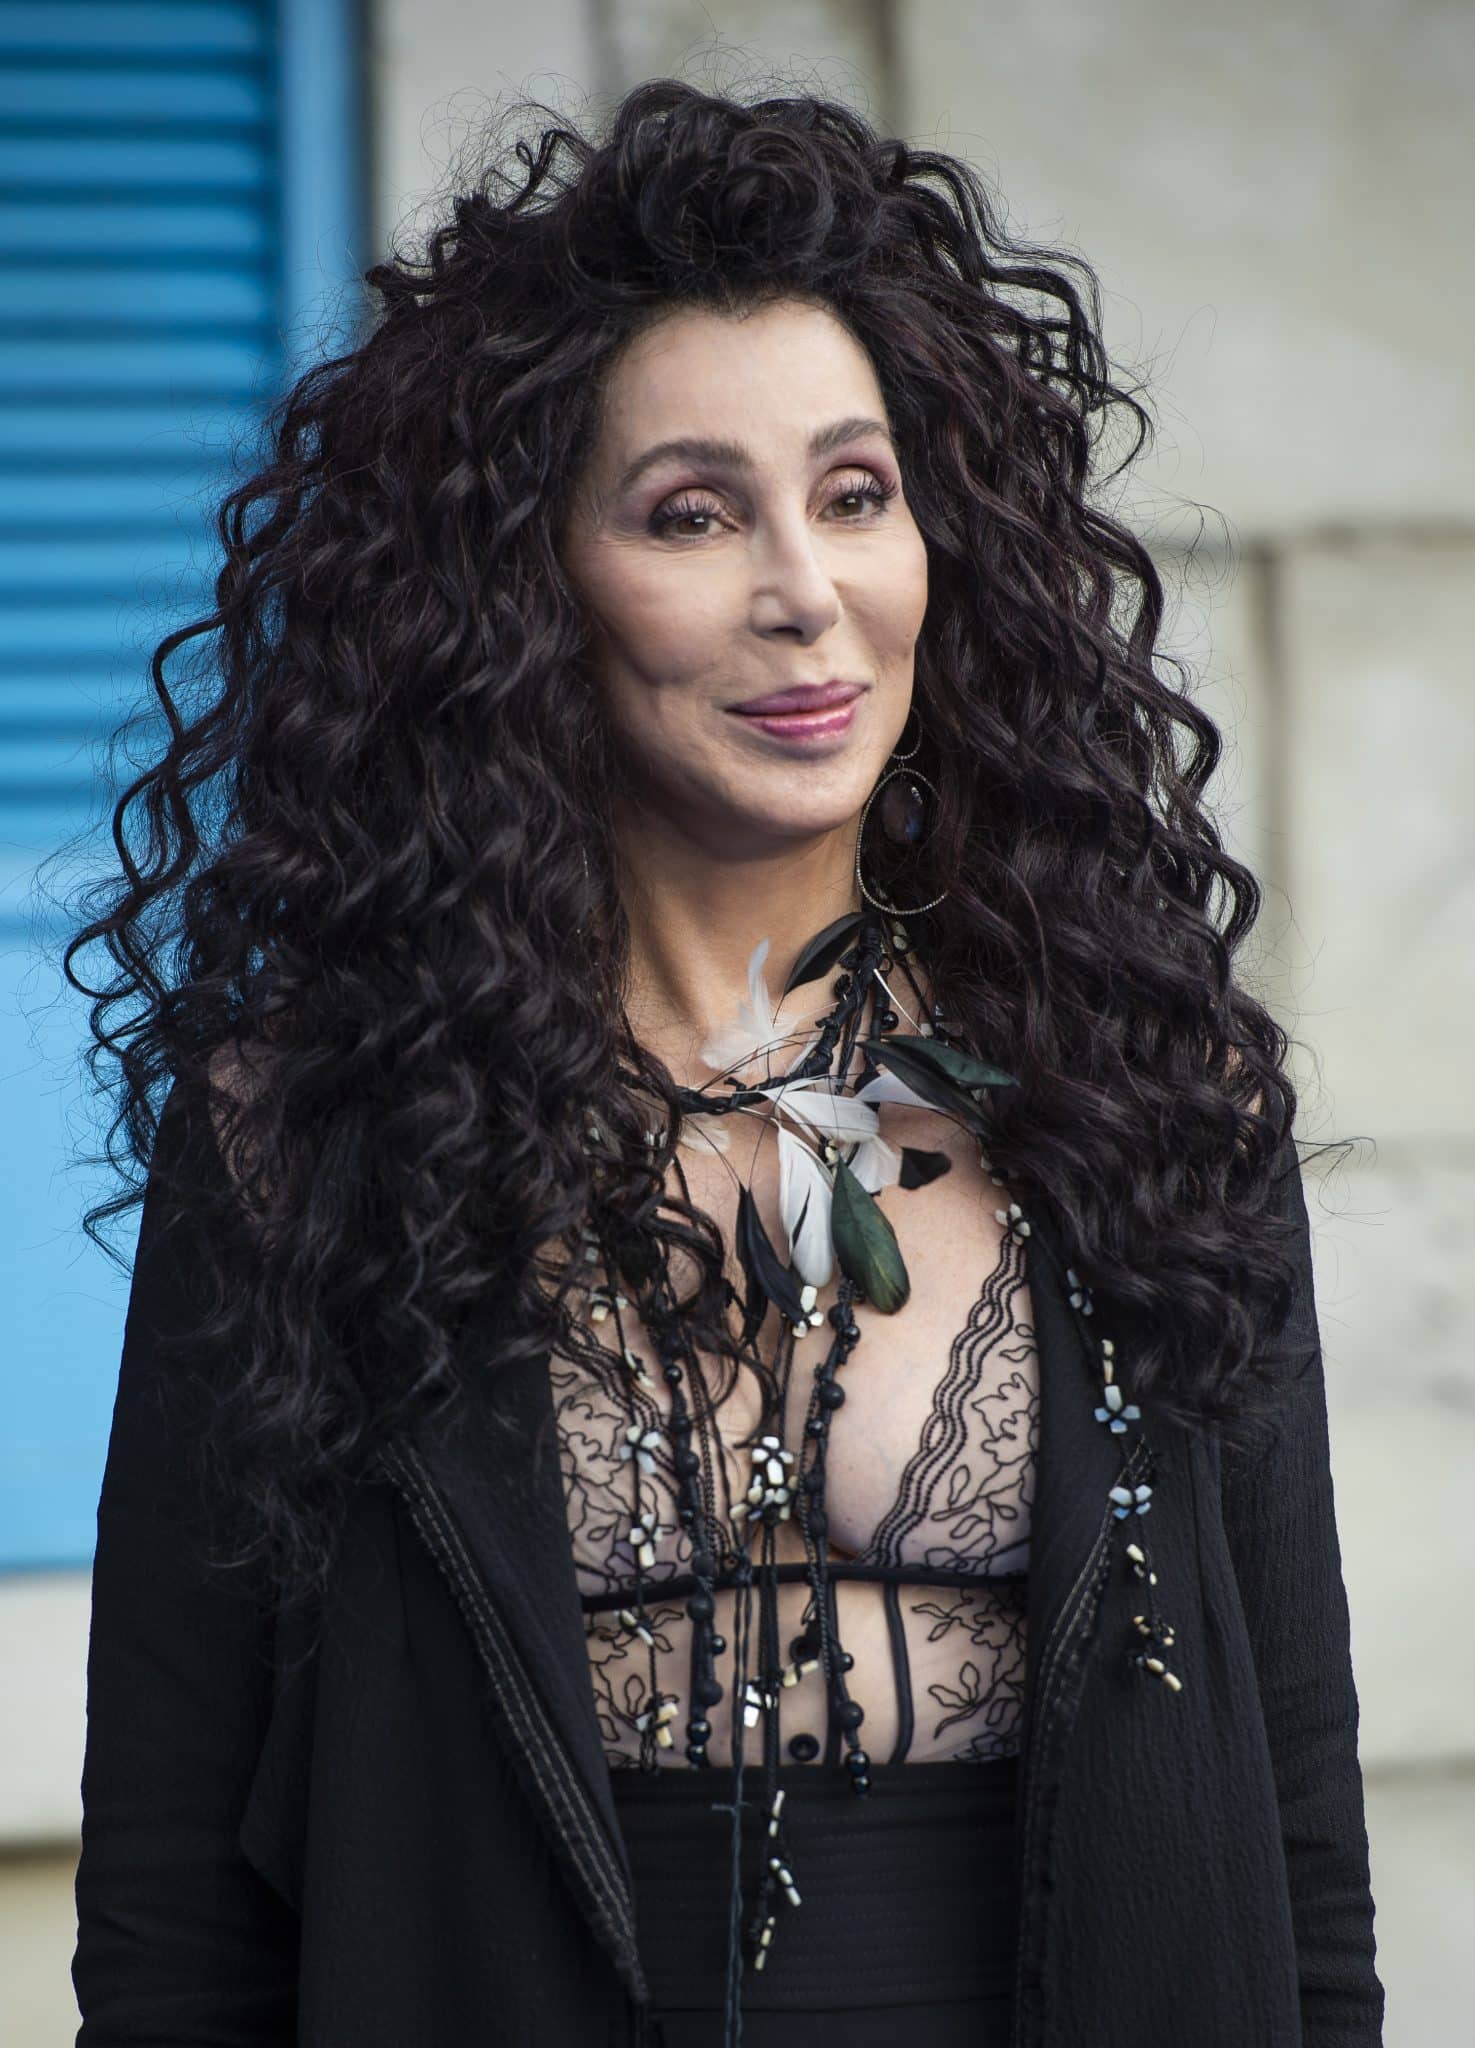 Cher Claps Back At Rock And Roll Hall Of Fame For Excluding Her 4007